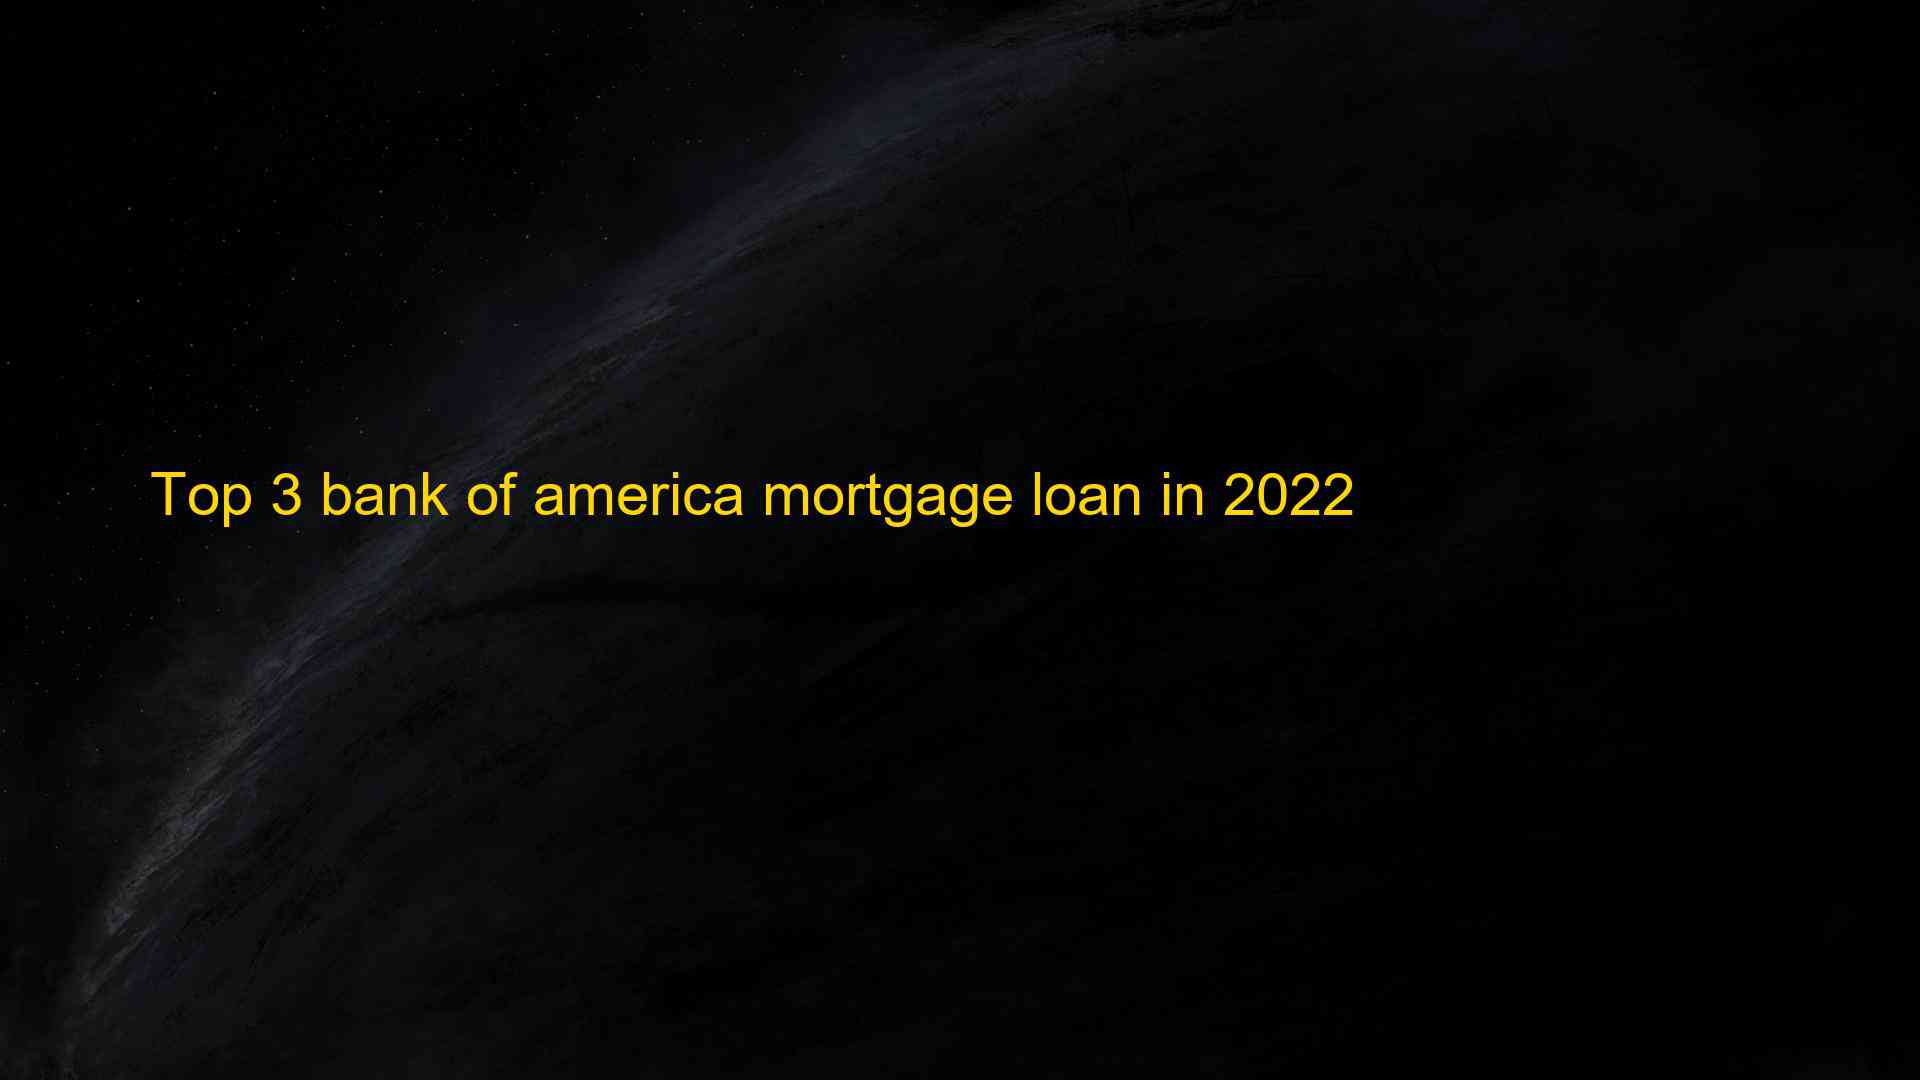 Top 3 bank of america mortgage loan in 2022 1659592588